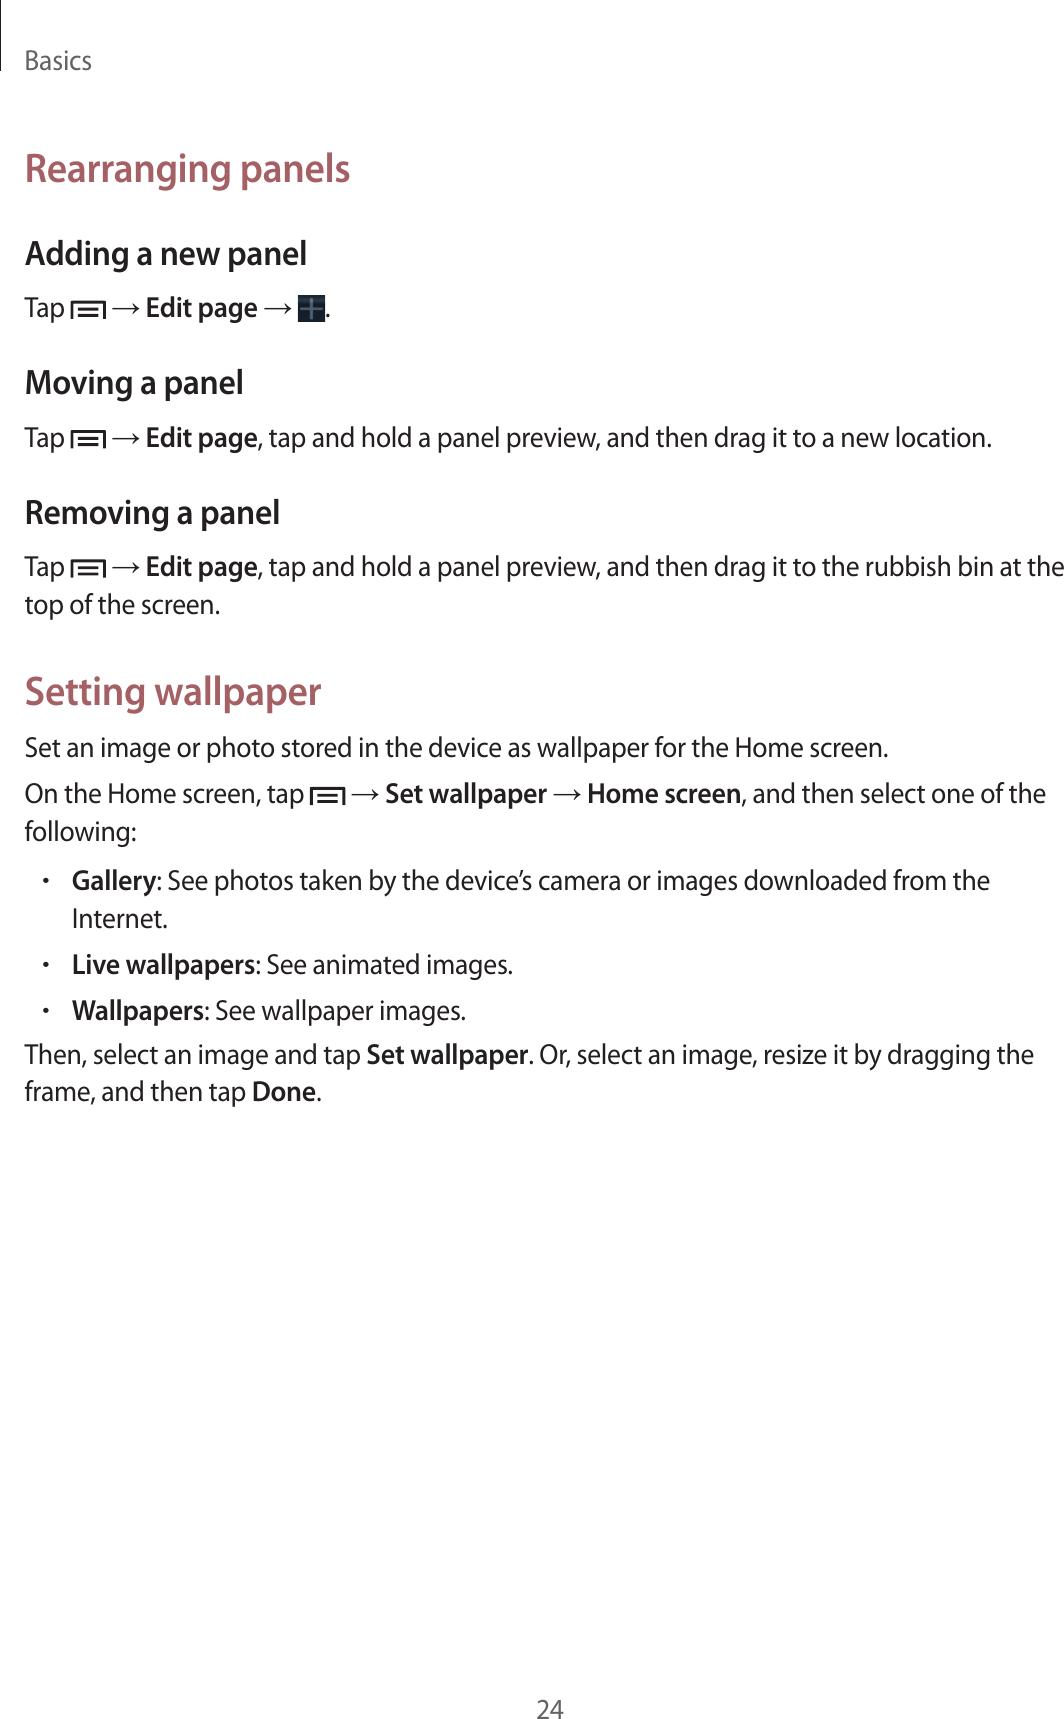 Basics24Rearranging panelsAdding a new panelTap   → Edit page →  .Moving a panelTap   → Edit page, tap and hold a panel preview, and then drag it to a new location.Removing a panelTap   → Edit page, tap and hold a panel preview, and then drag it to the rubbish bin at the top of the screen.Setting wallpaperSet an image or photo stored in the device as wallpaper for the Home screen.On the Home screen, tap   → Set wallpaper → Home screen, and then select one of the following:• Gallery: See photos taken by the device’s camera or images downloaded from the Internet.• Live wallpapers: See animated images.• Wallpapers: See wallpaper images.Then, select an image and tap Set wallpaper. Or, select an image, resize it by dragging the frame, and then tap Done.